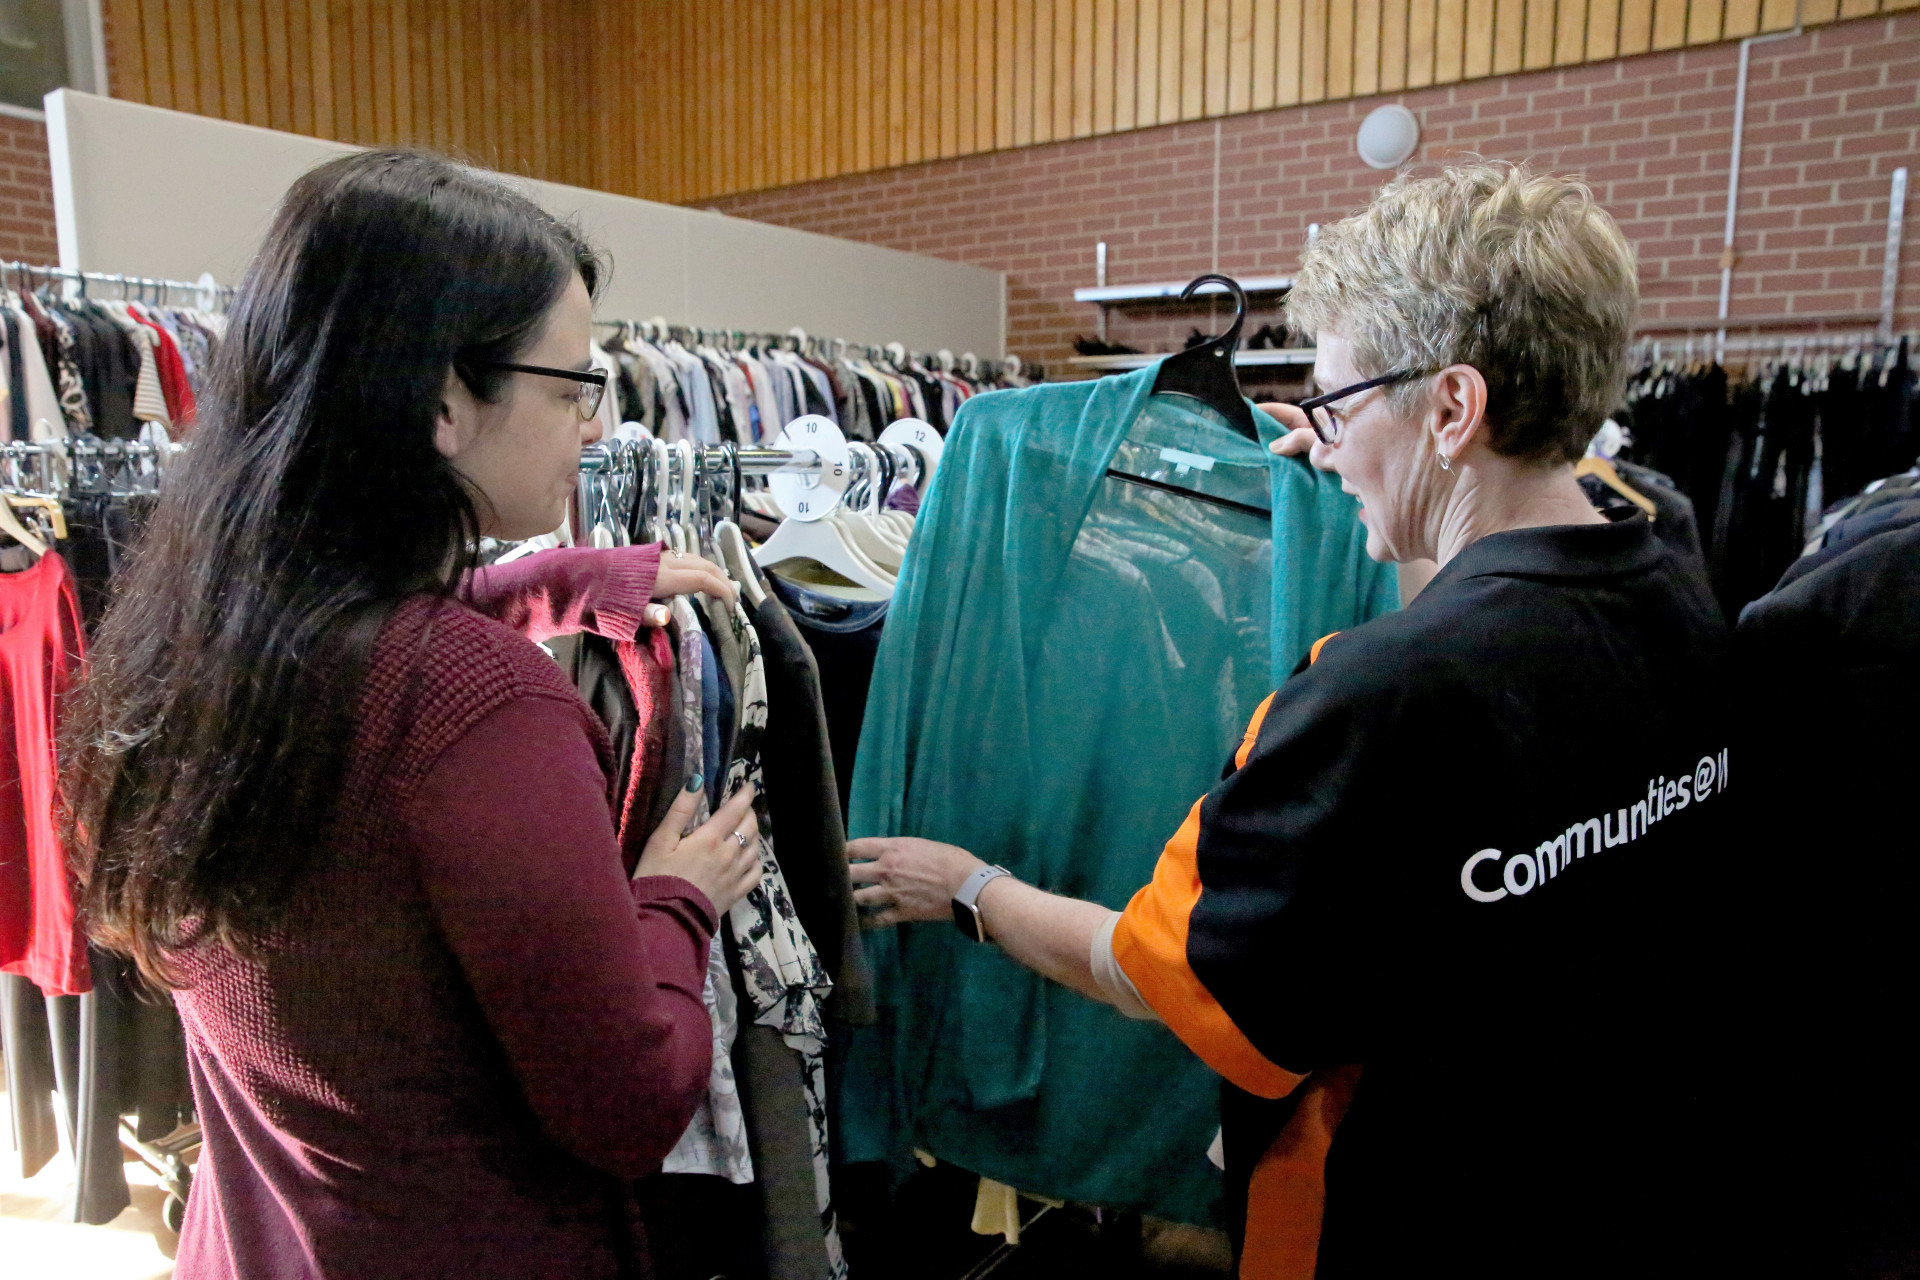 Communities@Work clothing program provides free work clothes for those in need